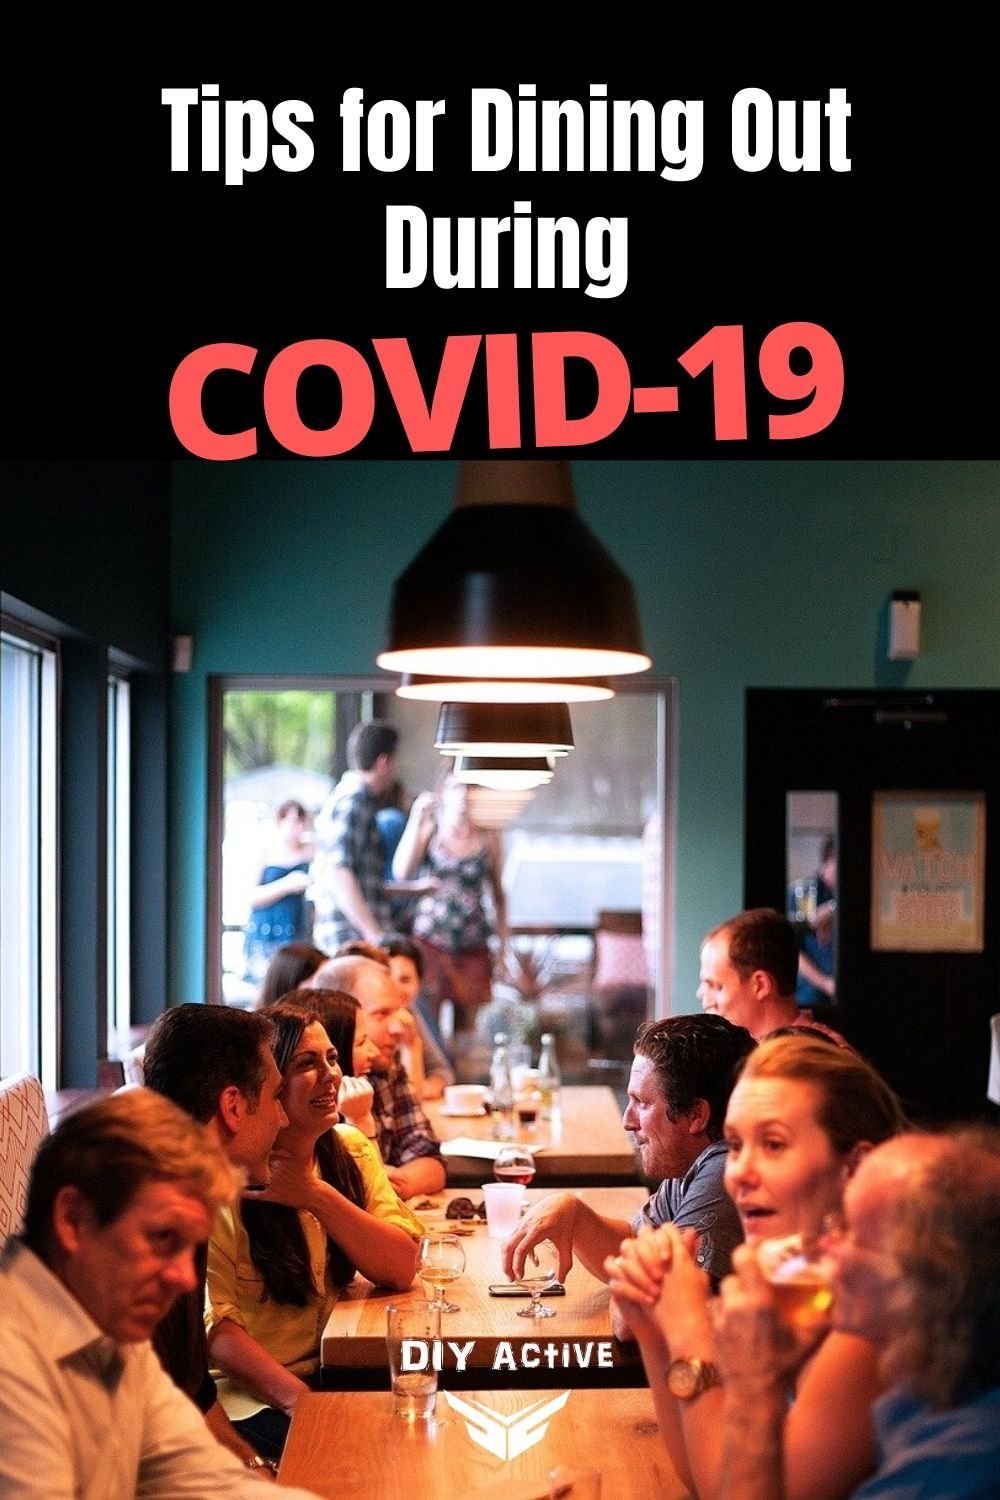 Tips for Dining Out During COVID-19